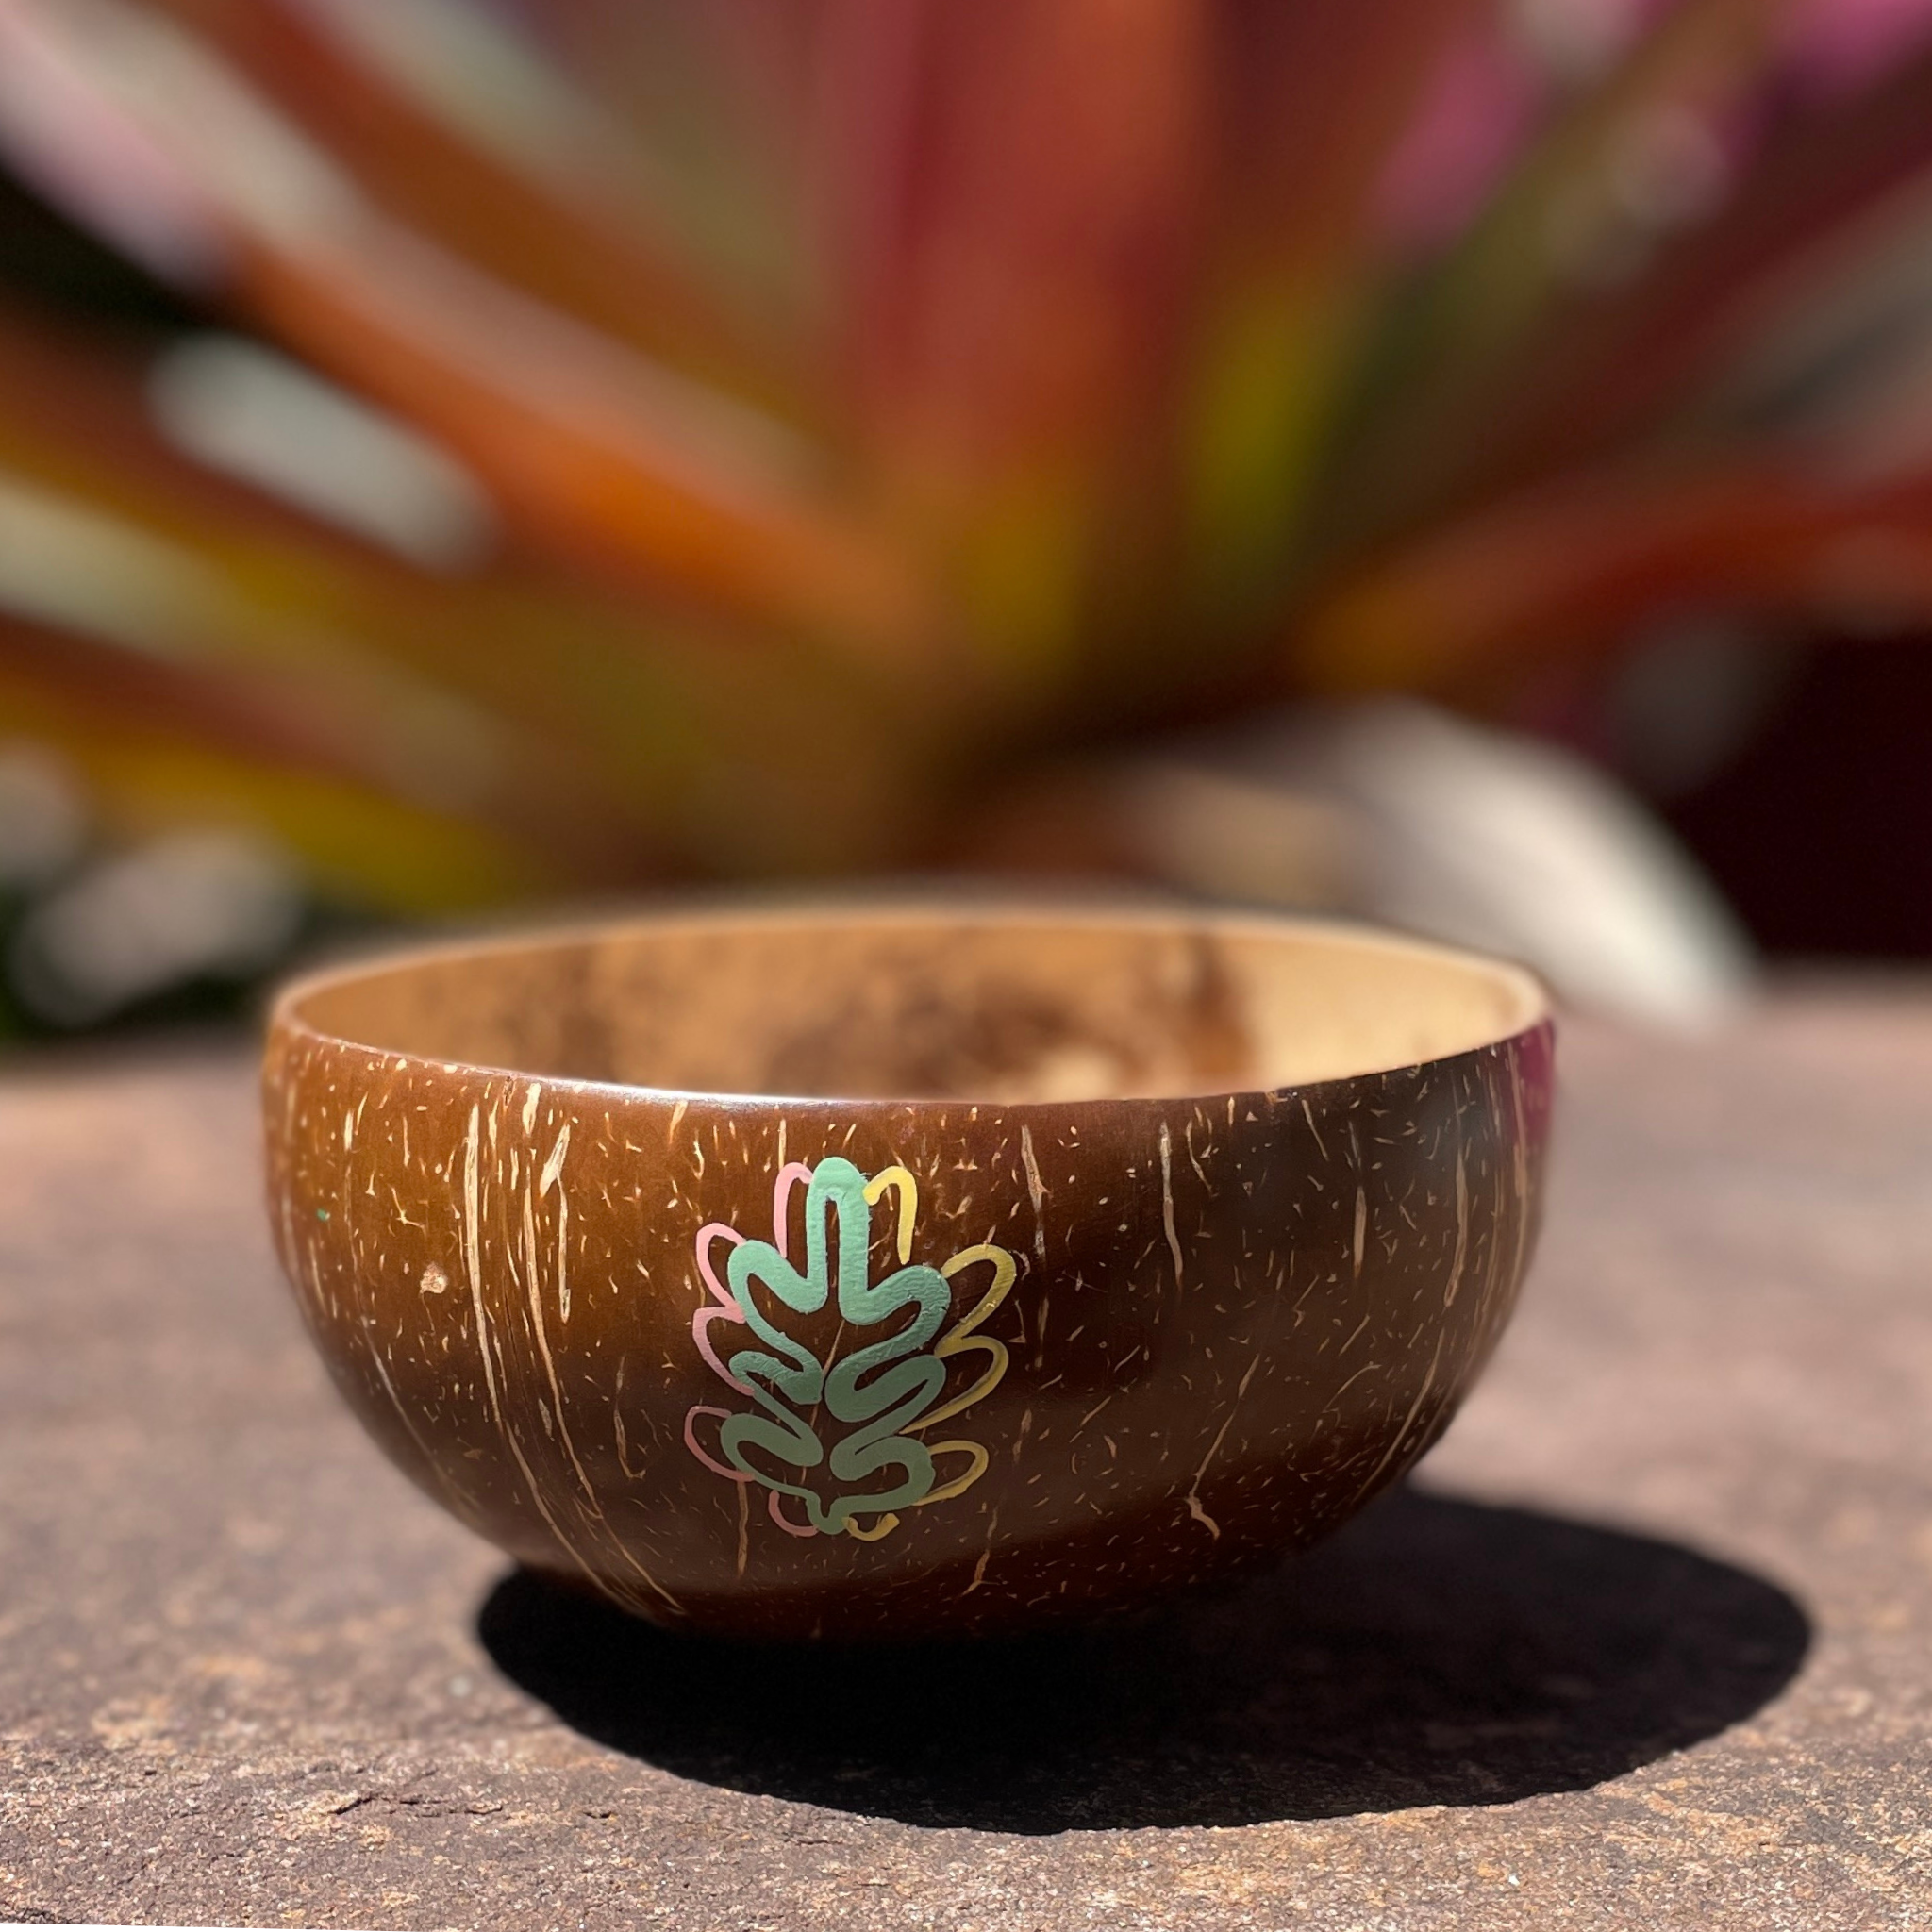 plastic free ethical coconut bowl with painted leaves